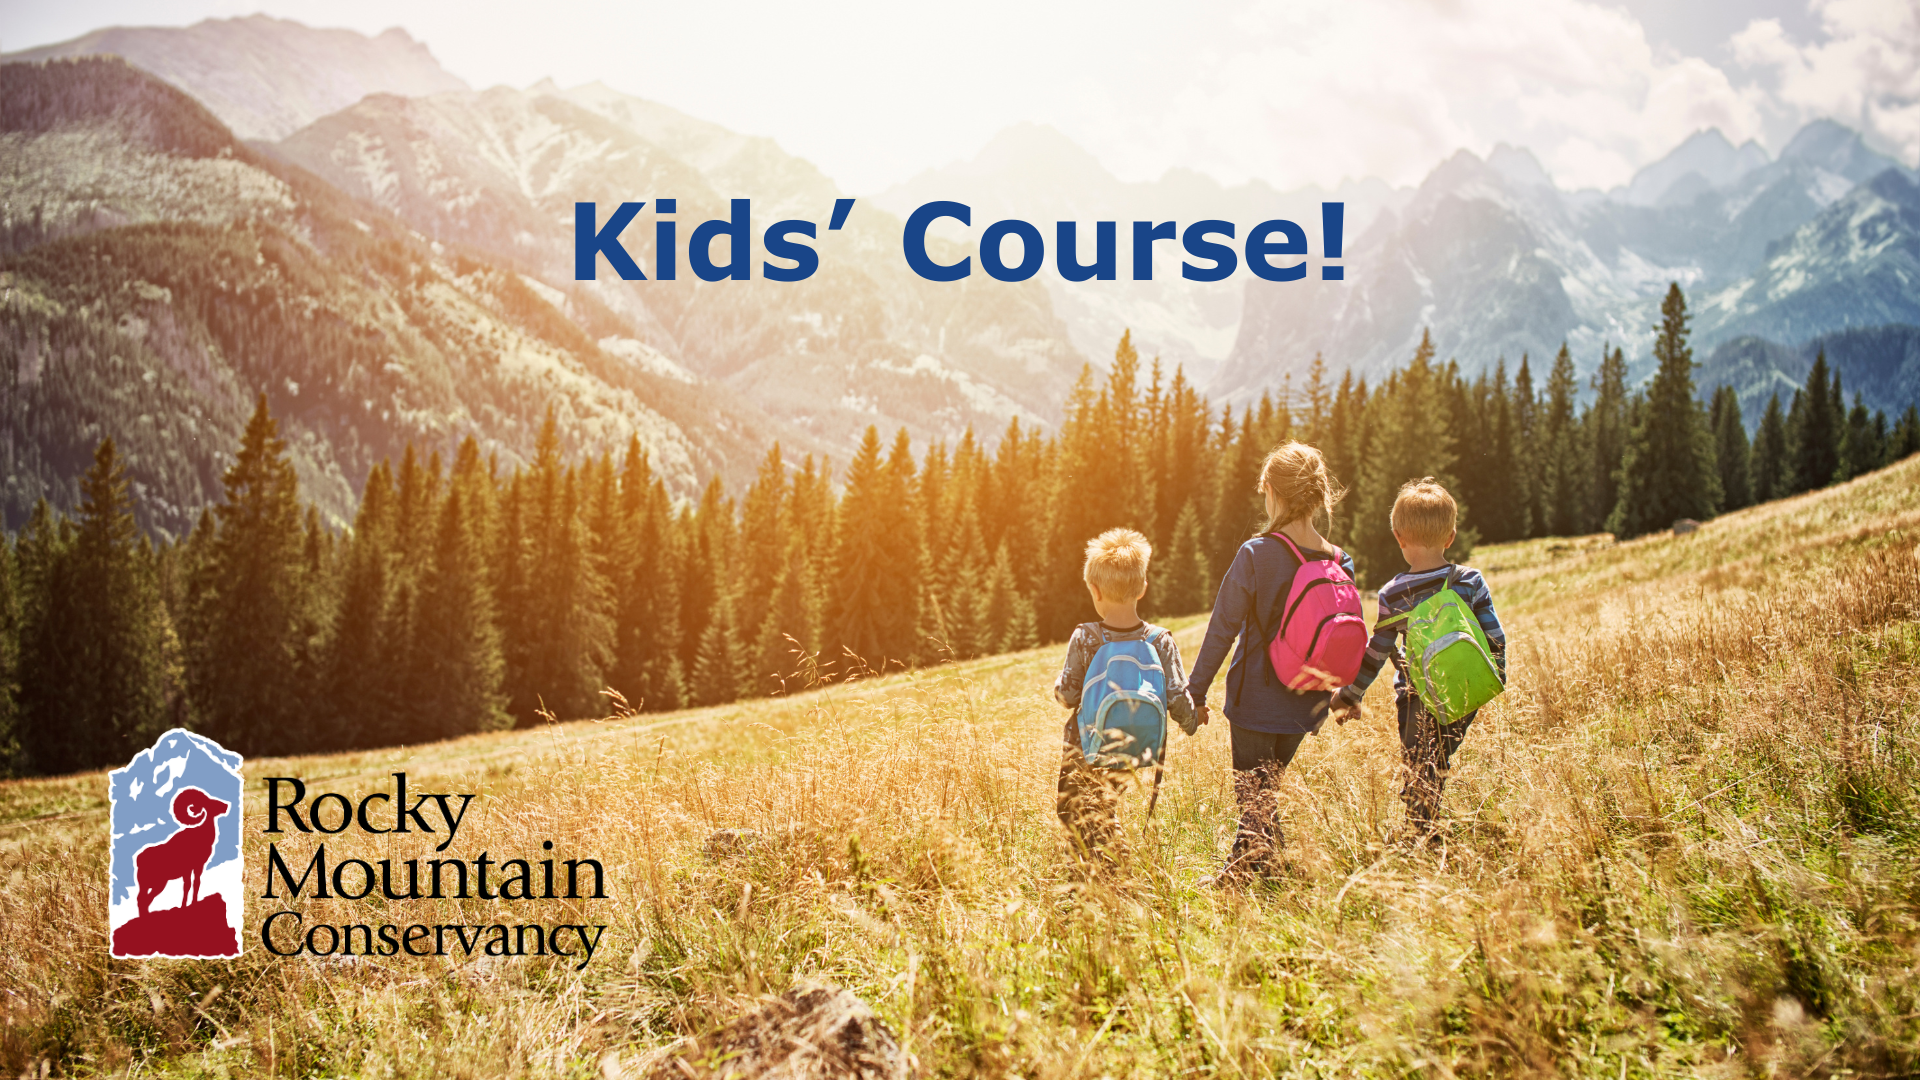 Landscape photograph with sunny mountains in the background, a conifer forest, and a grassy slope in the foreground. Three children wearing backpacks are walking away down the grassy slope. The Rocky Mountain Conservancy logo appears in the lower left-hand corner, and the words "Kids' Course!" are at the top of the image.